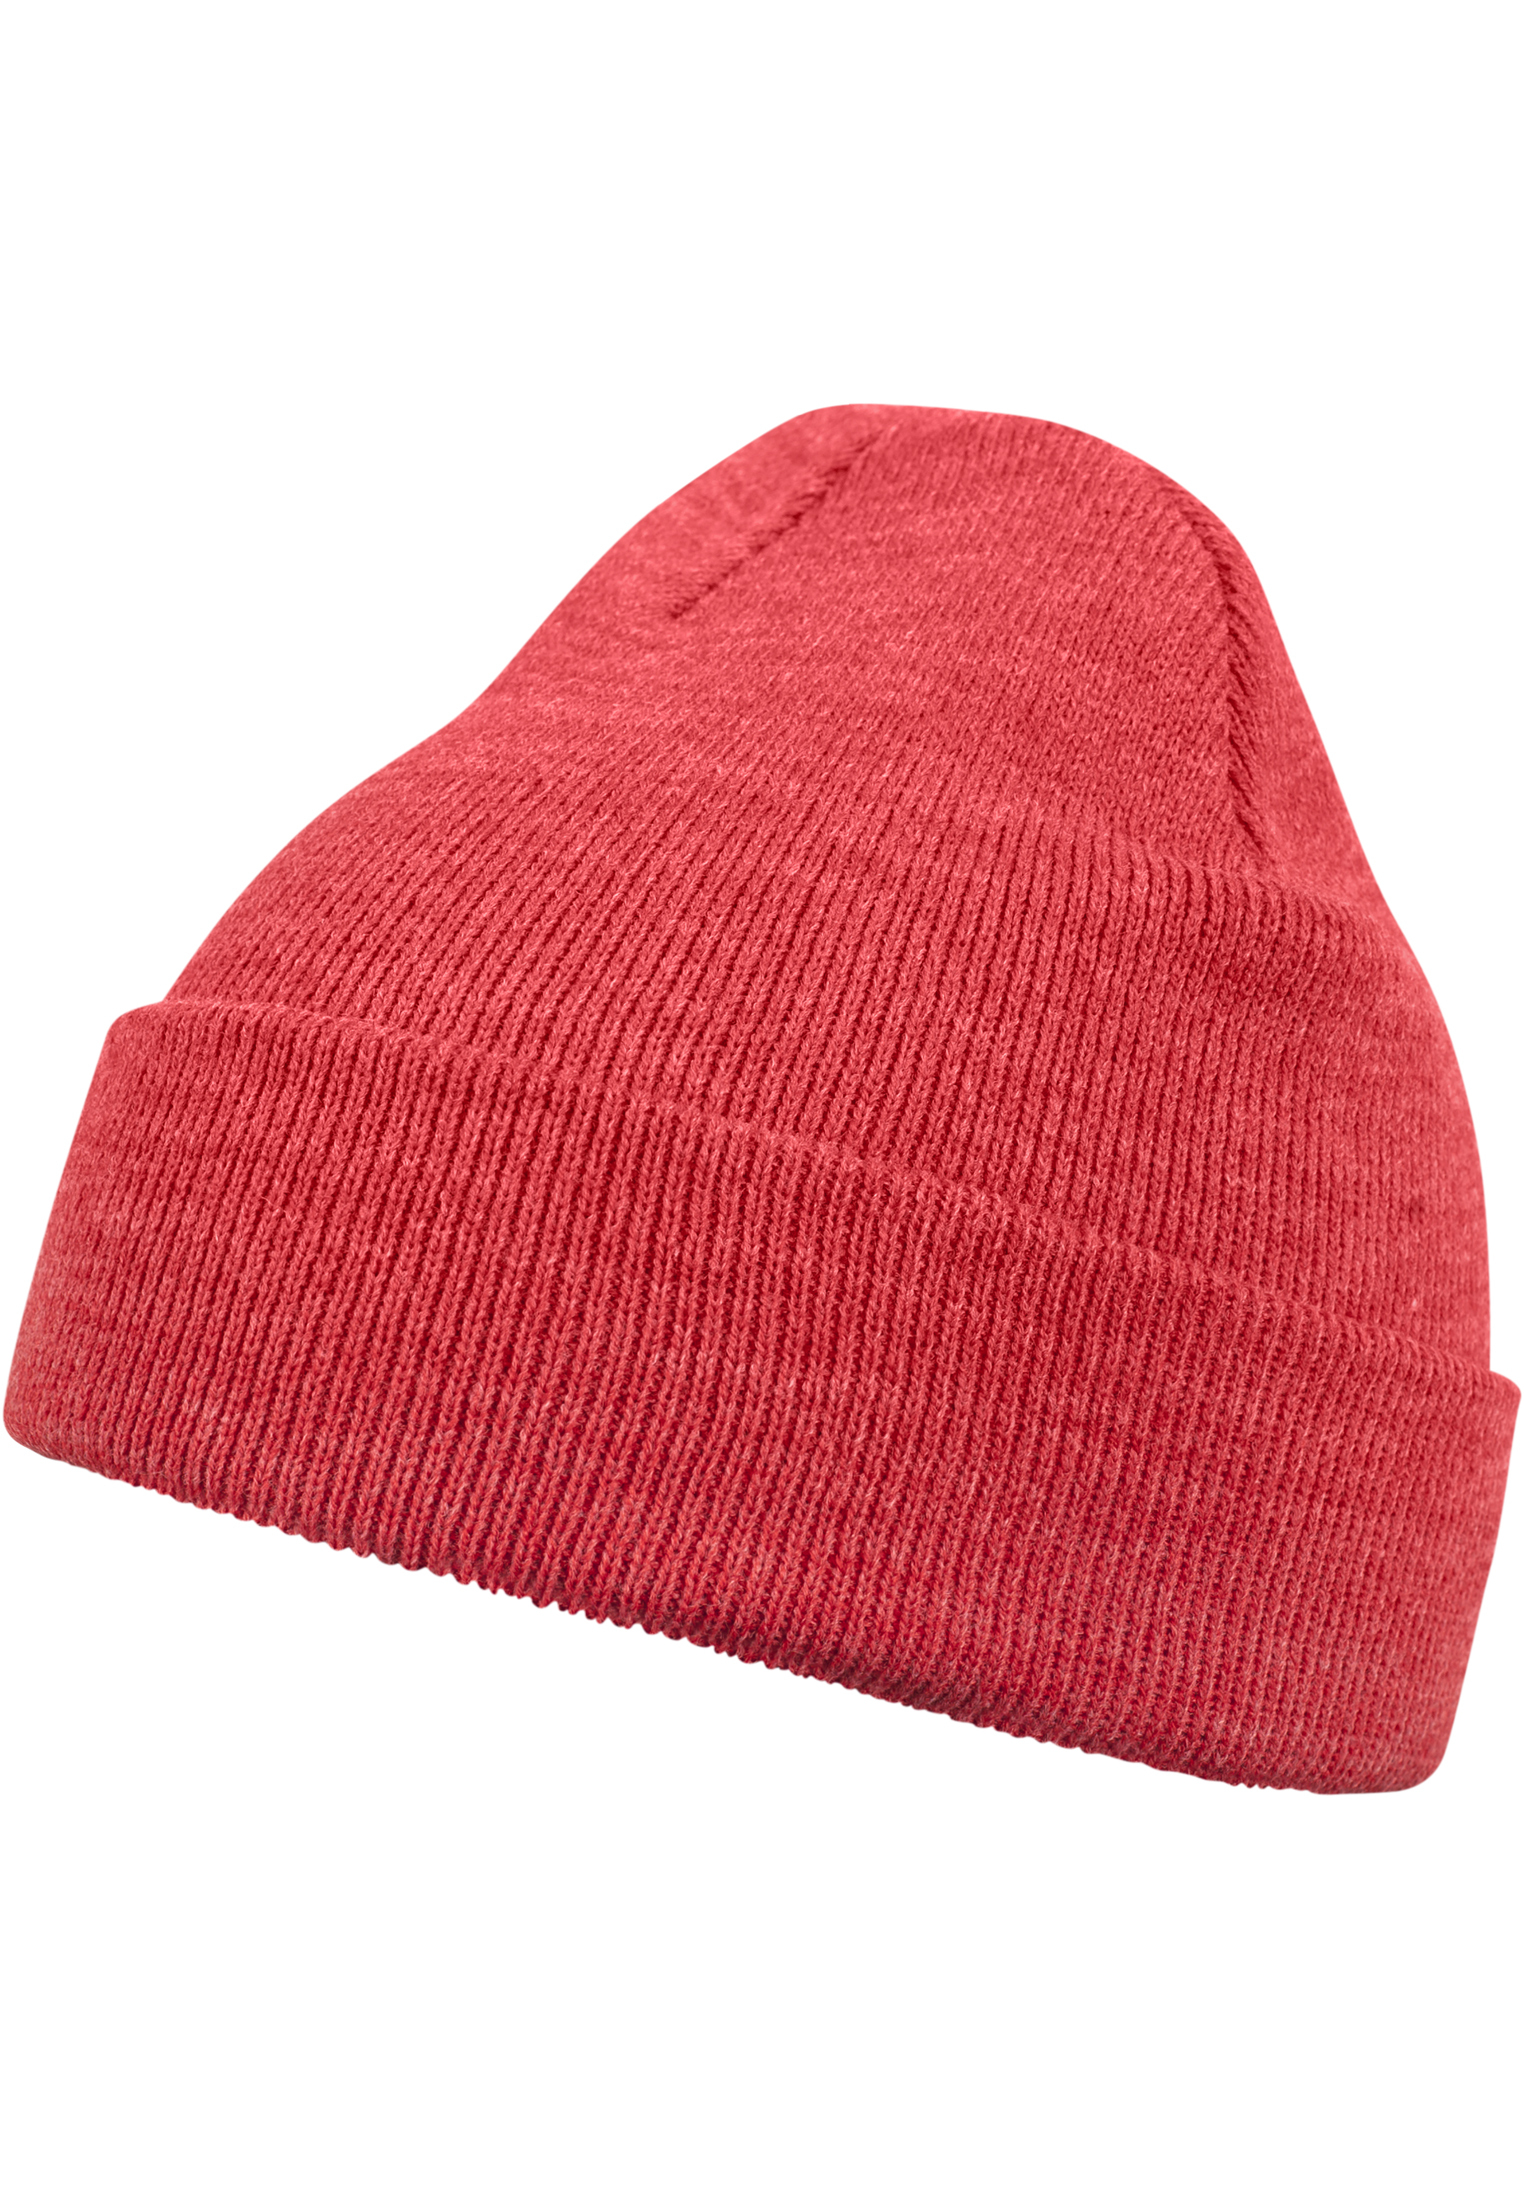 Кепка MSTRDS Beanies, цвет h.red